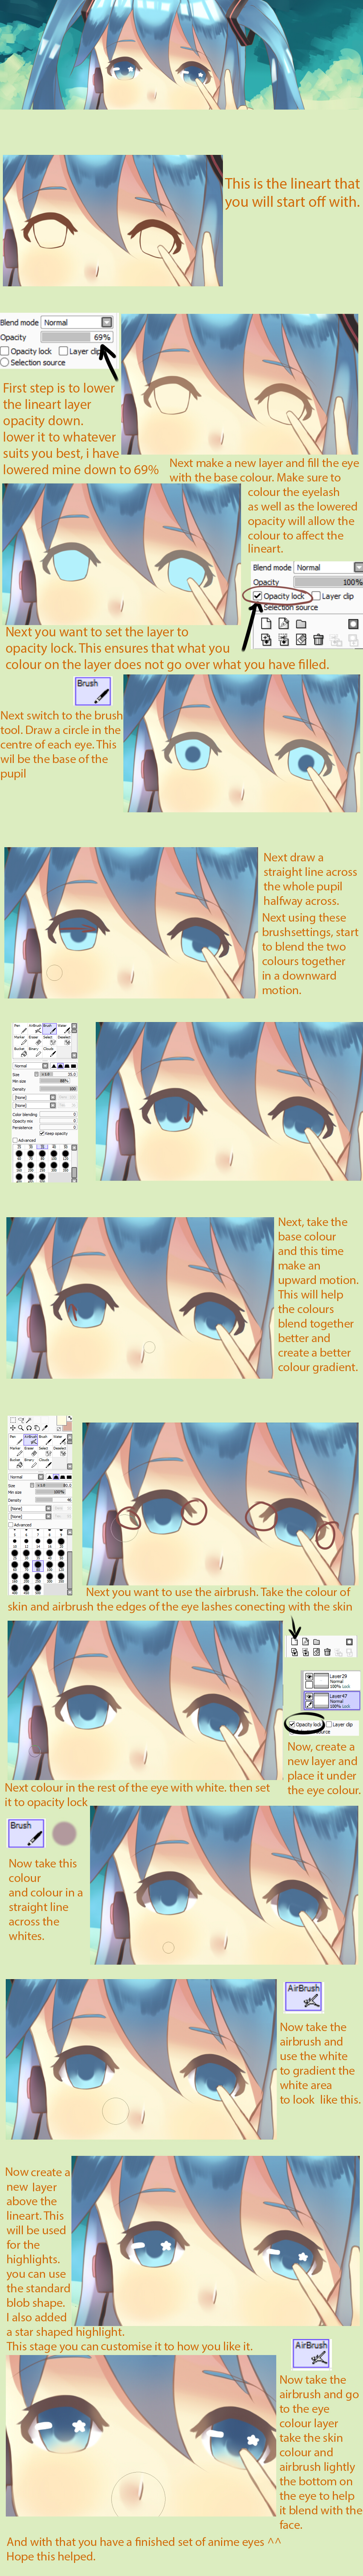 Anime eye colouring Tutorial by Himechui on DeviantArt